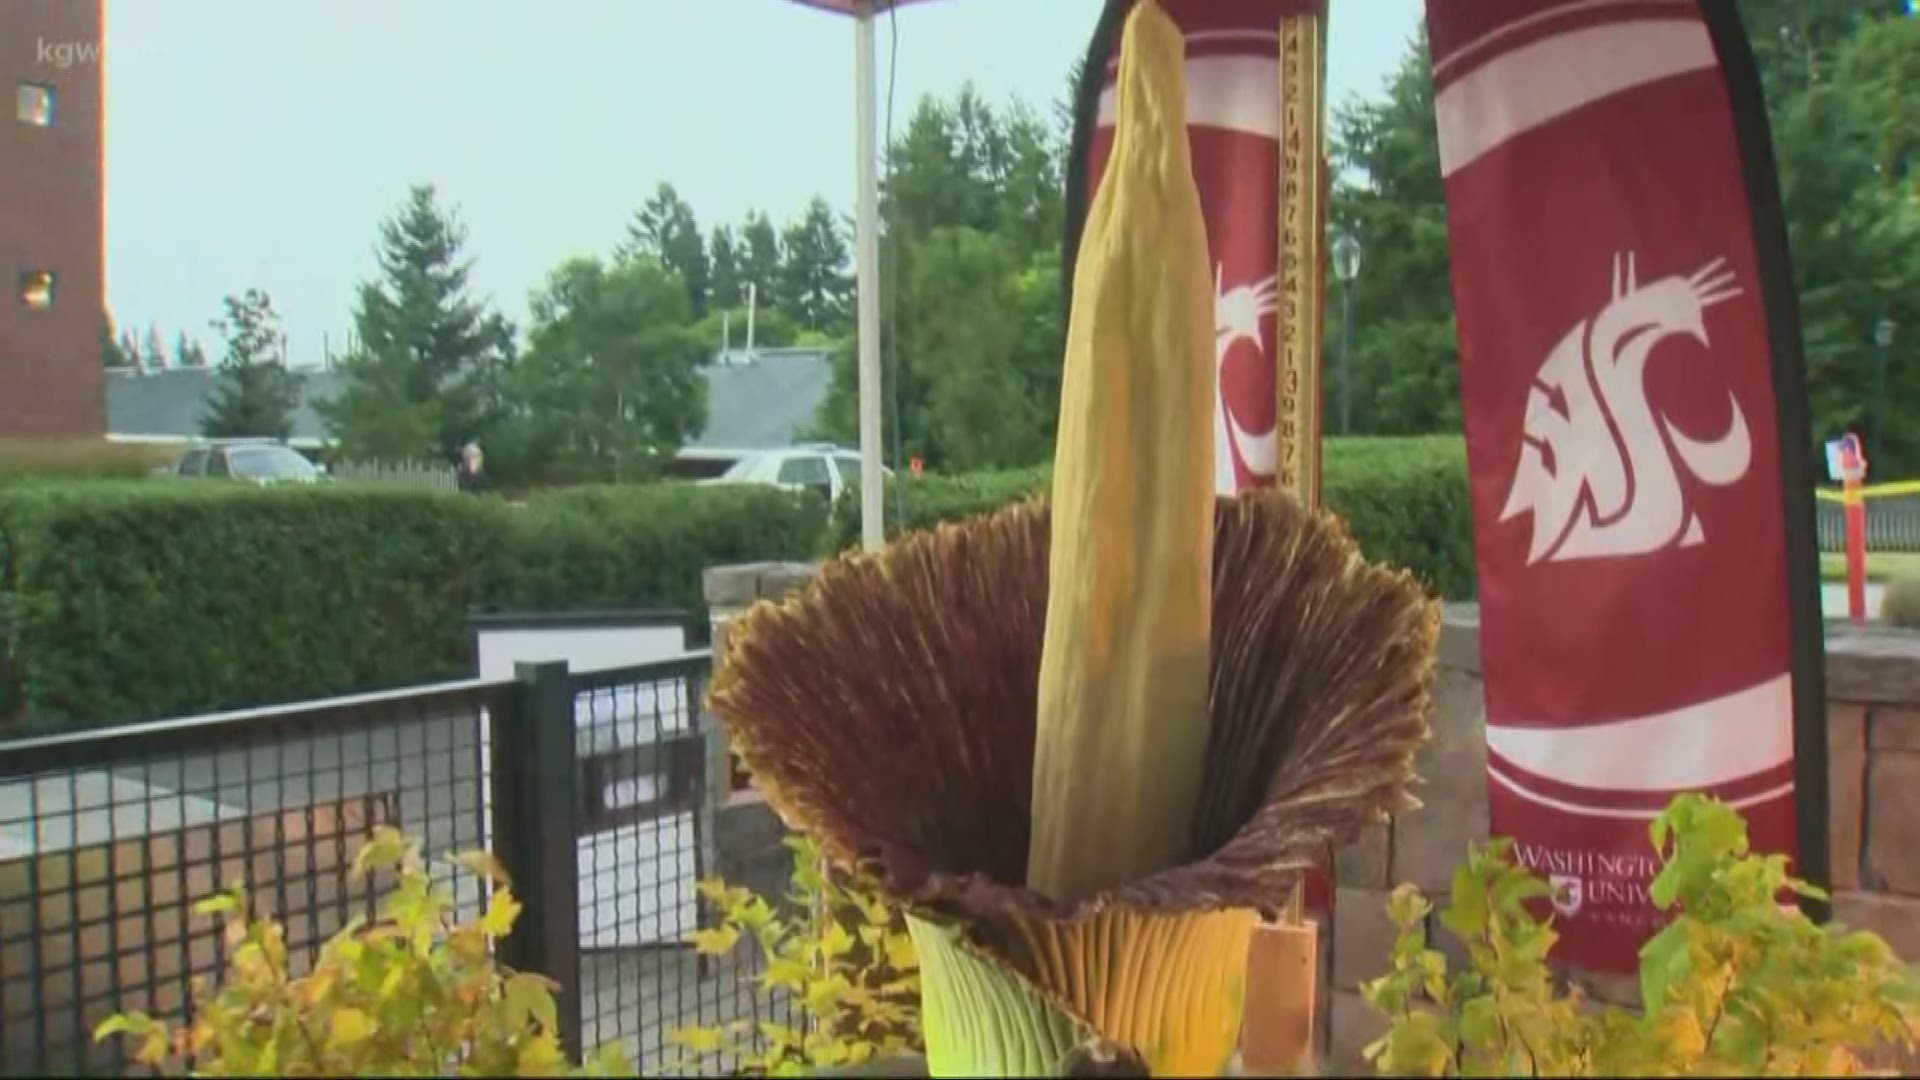 Professor Steve Sylvester was mowing his lawn when his wife told him to shut it down. His cellphone was blowing up with calls that his precious corpse flower was finally blooming after 17 years of nurturing.